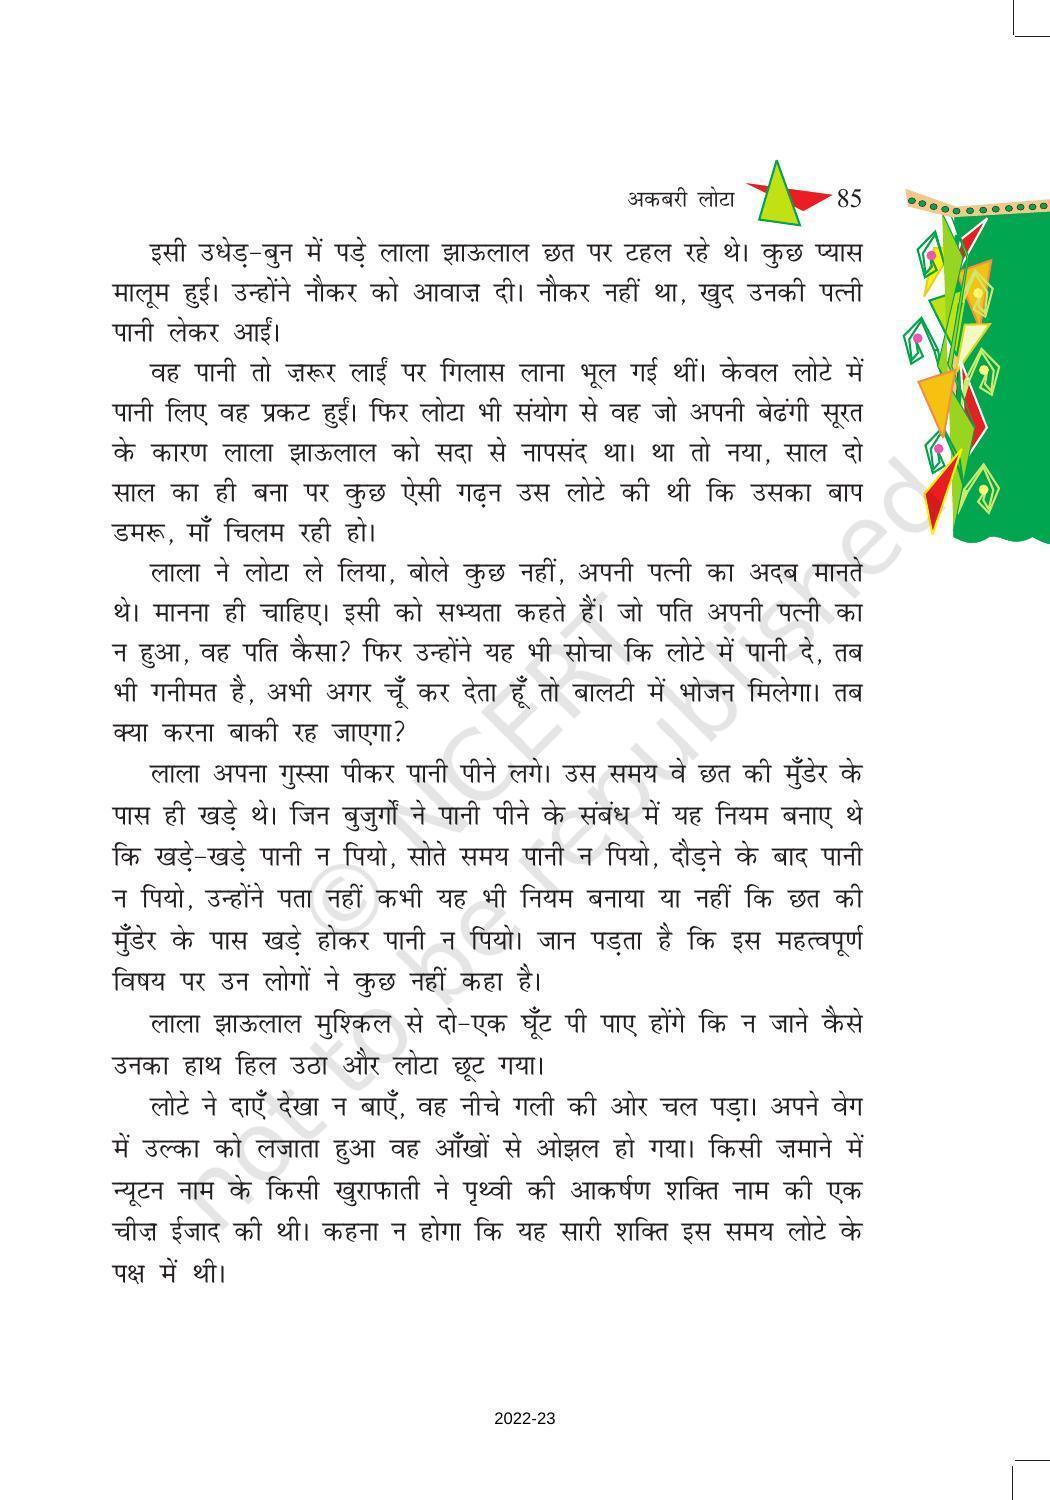 NCERT Book for Class 8 Hindi Vasant Chapter 14 अकबरी लोटा - Page 3